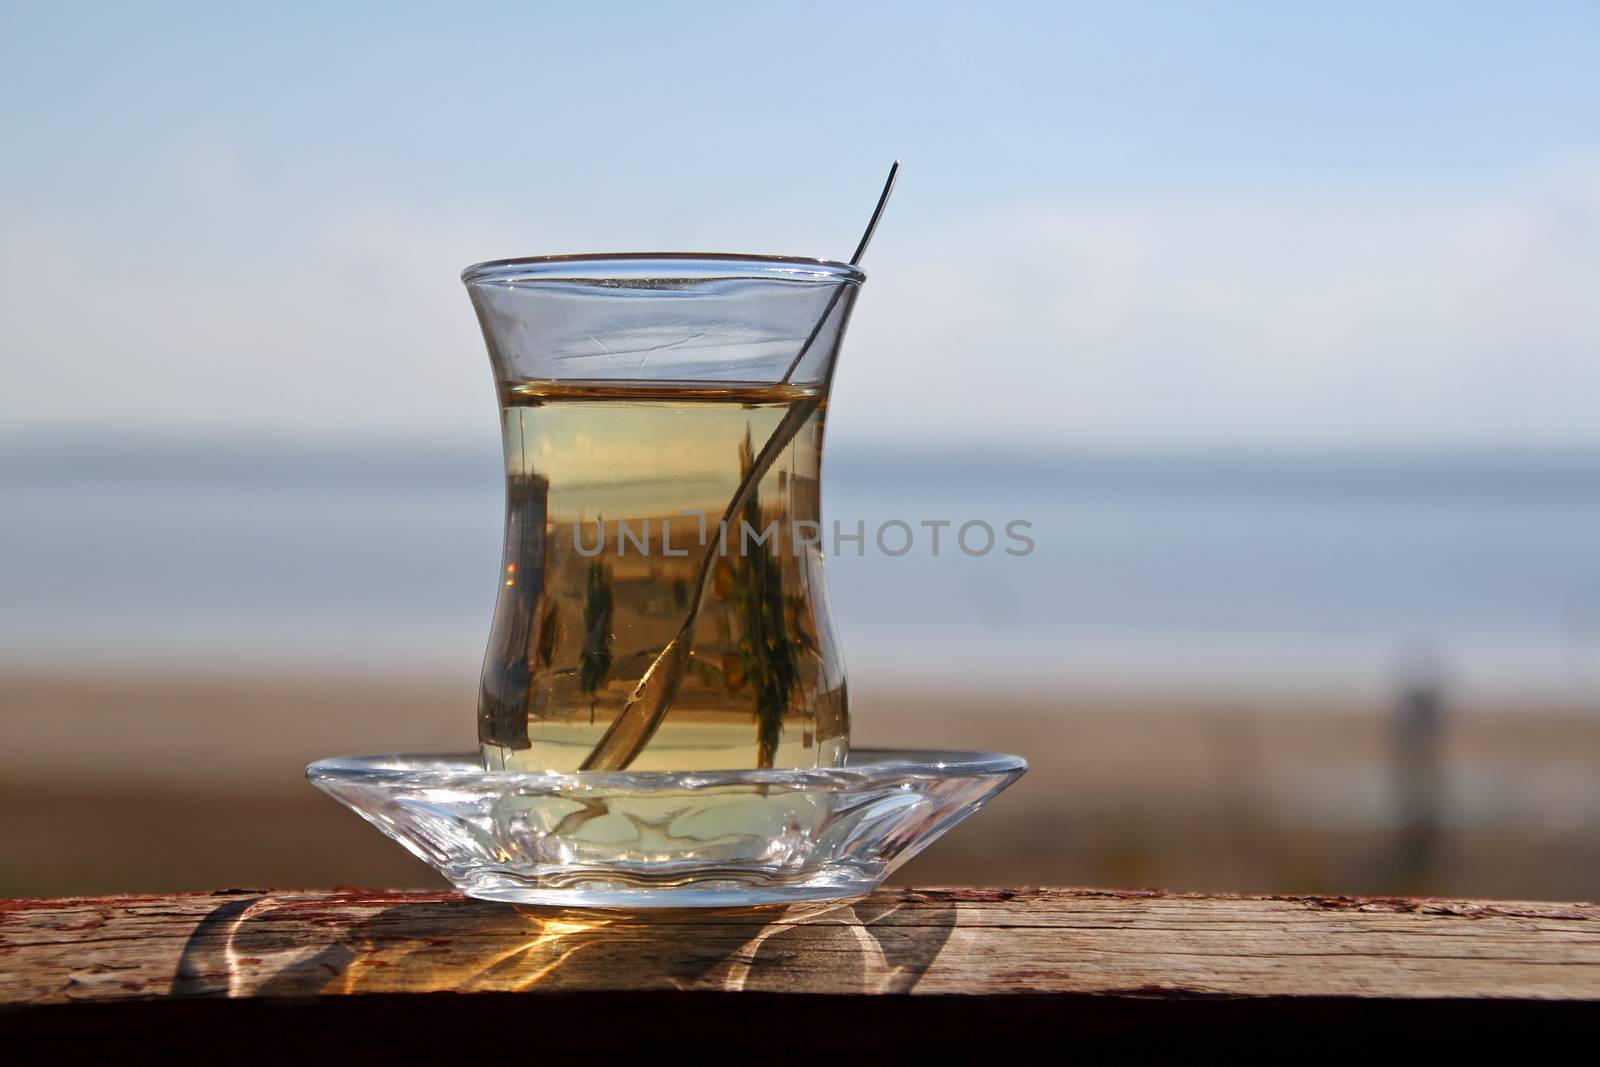 A glass of turkish tea by the sea